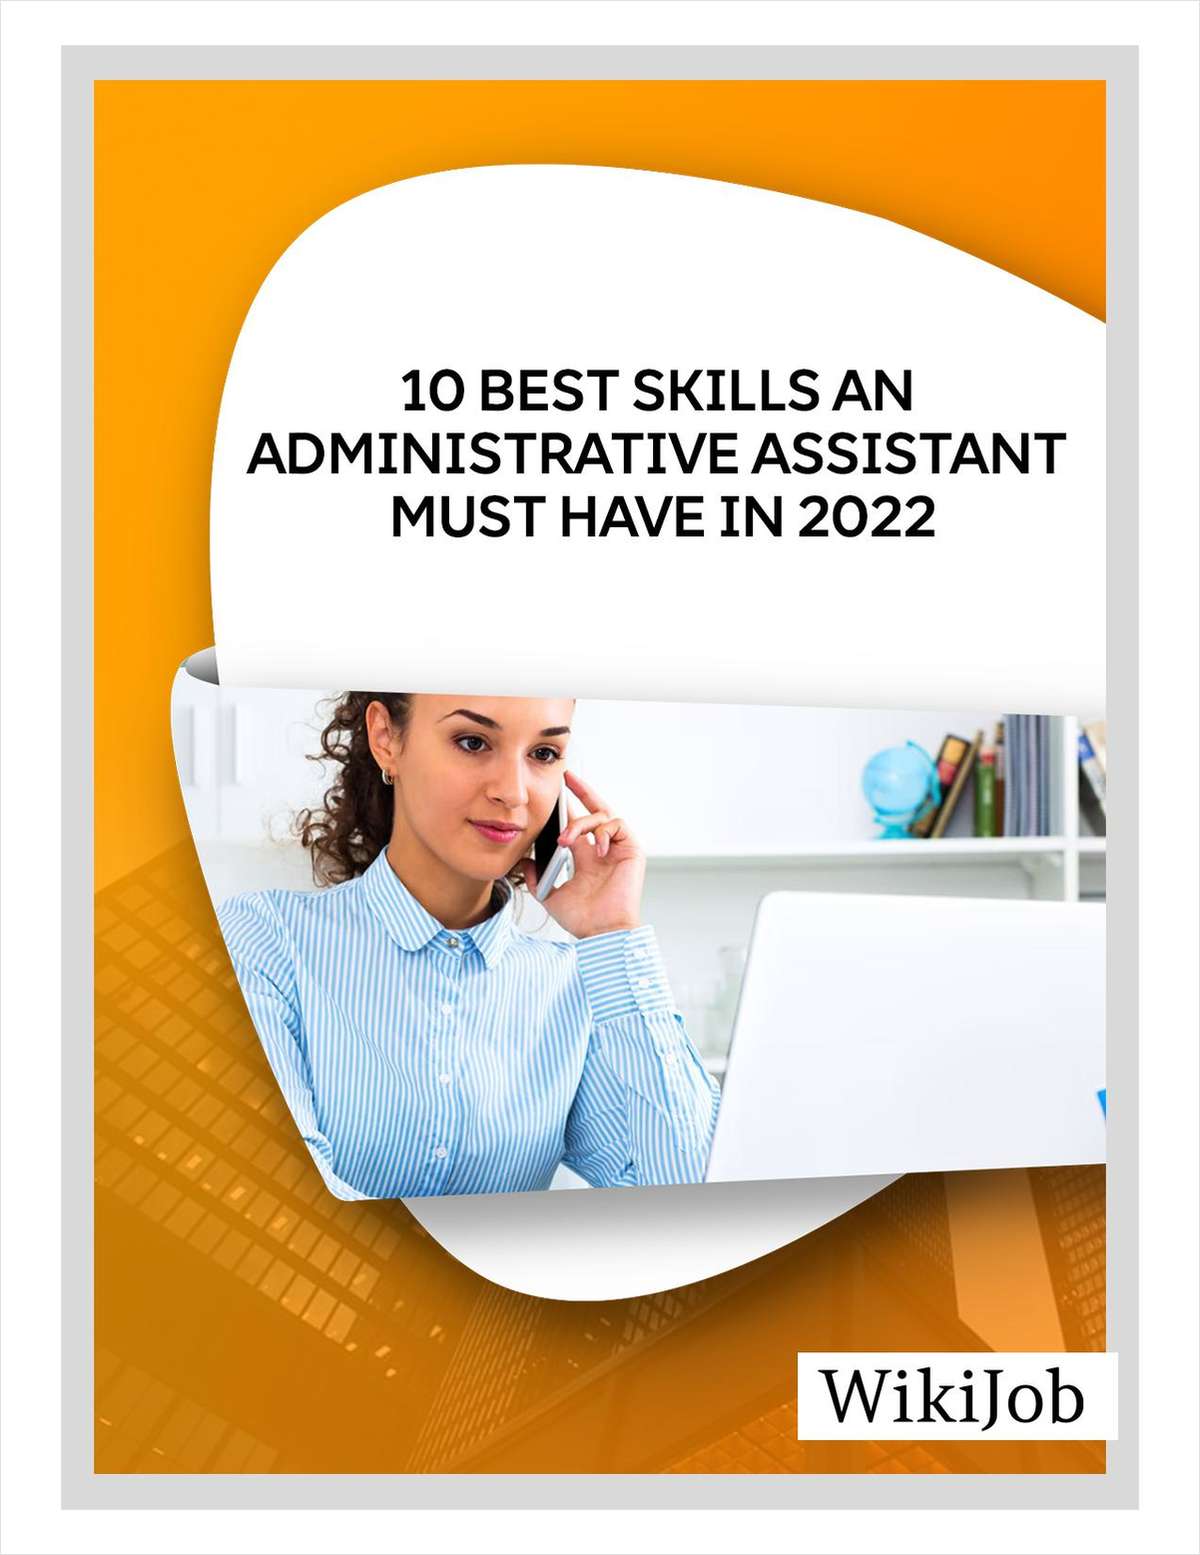 10 Best Skills an Administrative Assistant Must Have In 2022